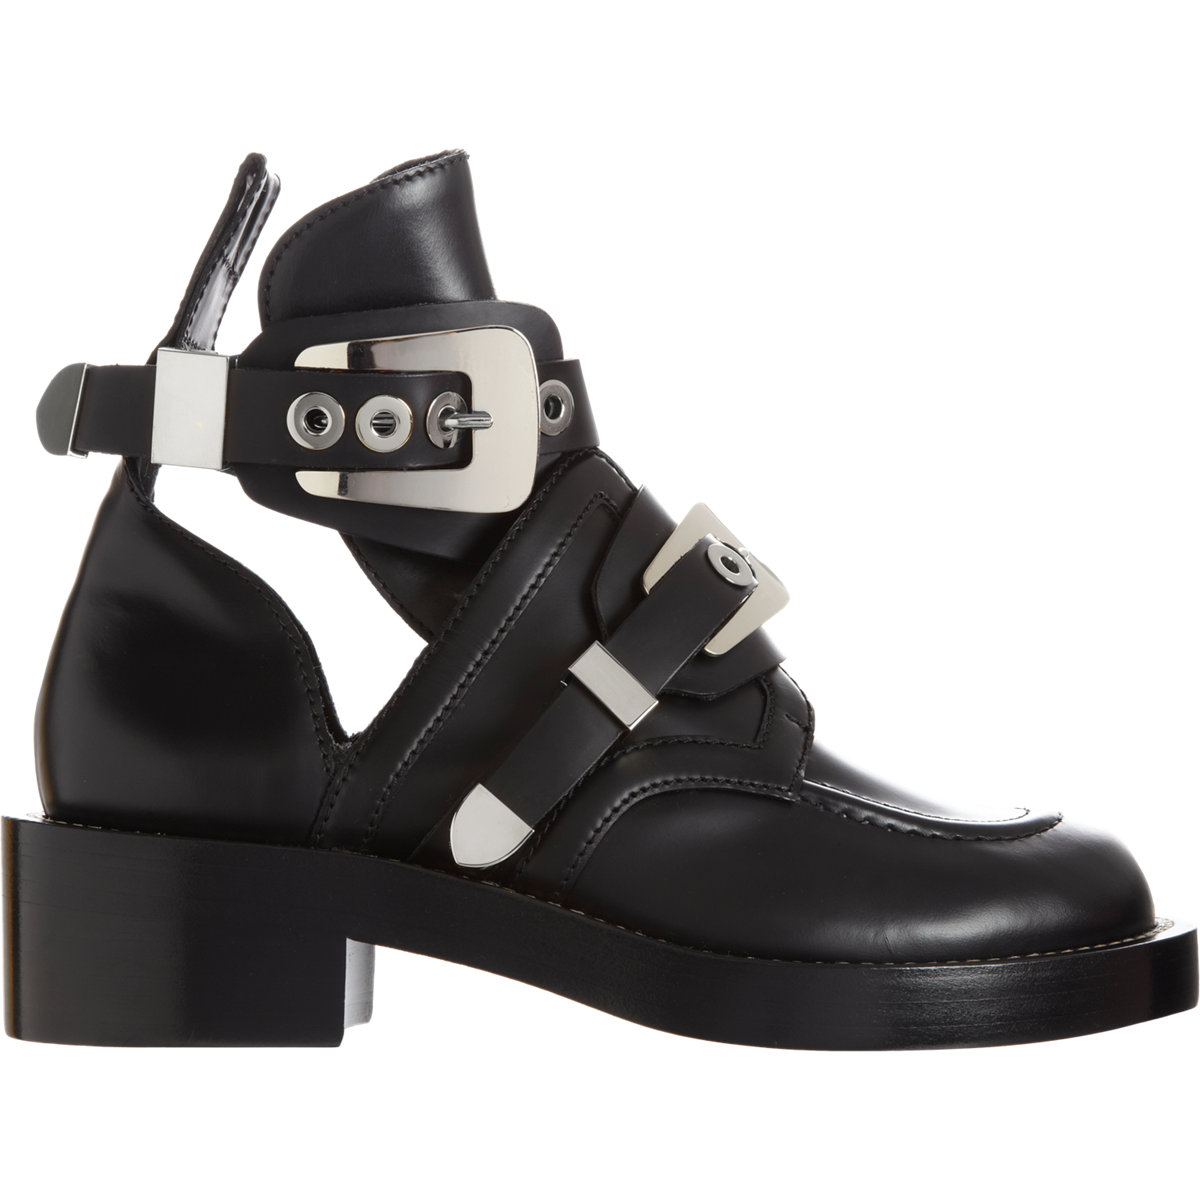 Balenciaga Buckle Strap Ankle Boot in Silver (Black) - Lyst